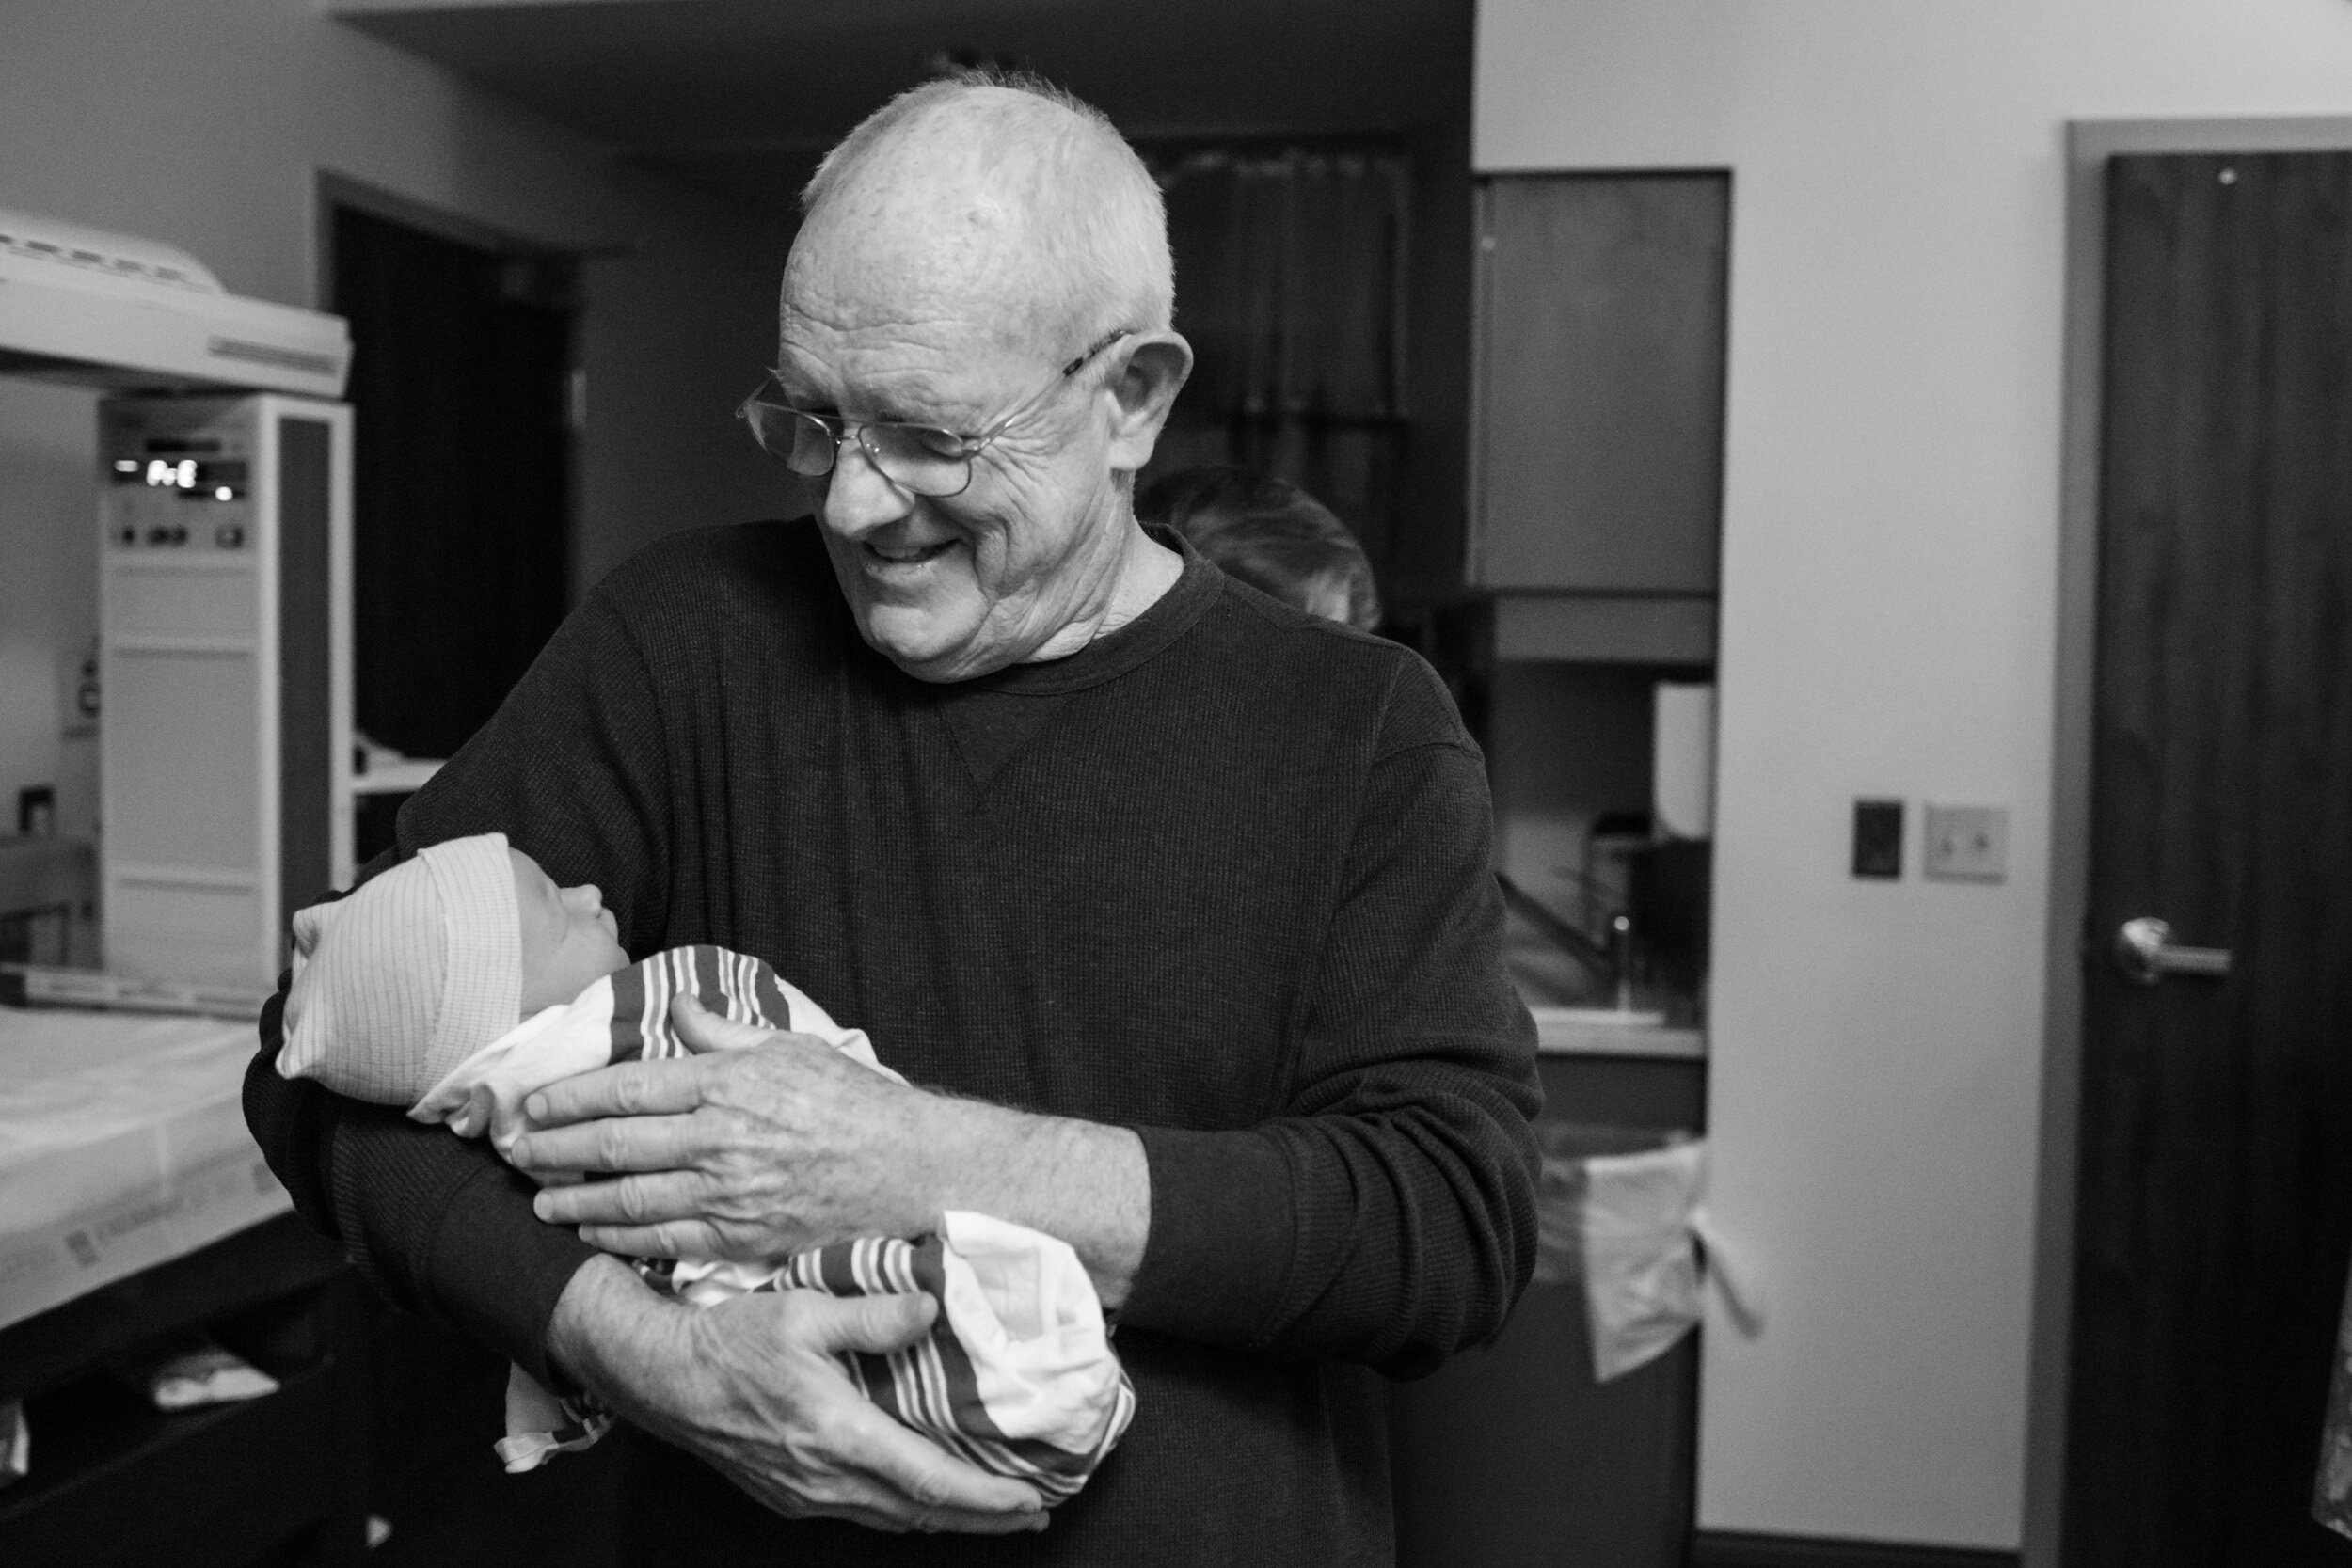 grandfather holding his new grandson